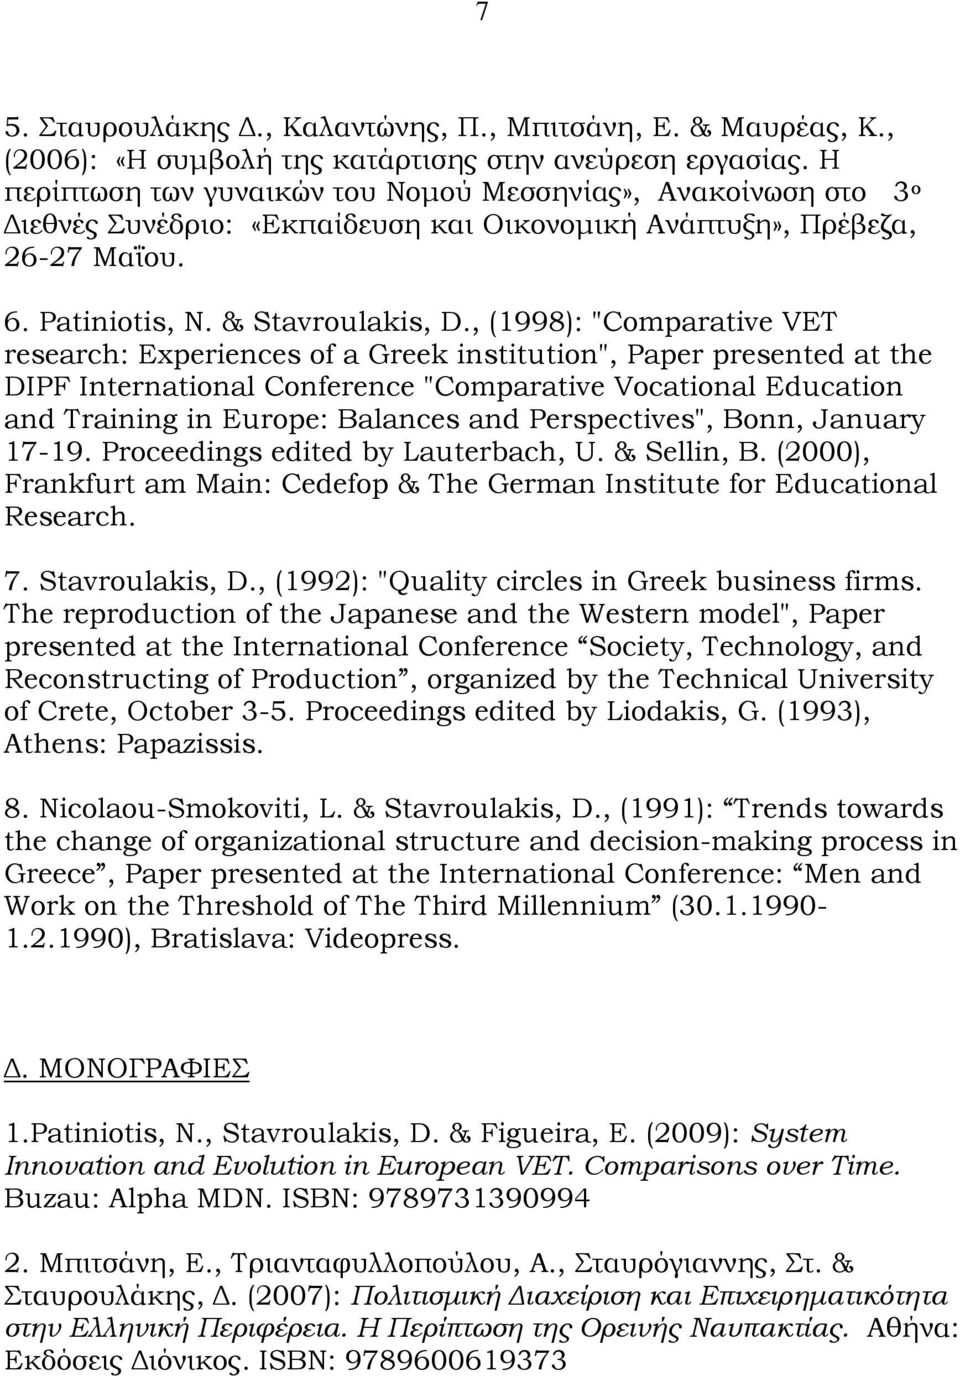 , (1998): "Comparative VET research: Experiences of a Greek institution", Paper presented at the DIPF International Conference "Comparative Vocational Education and Training in Europe: Balances and